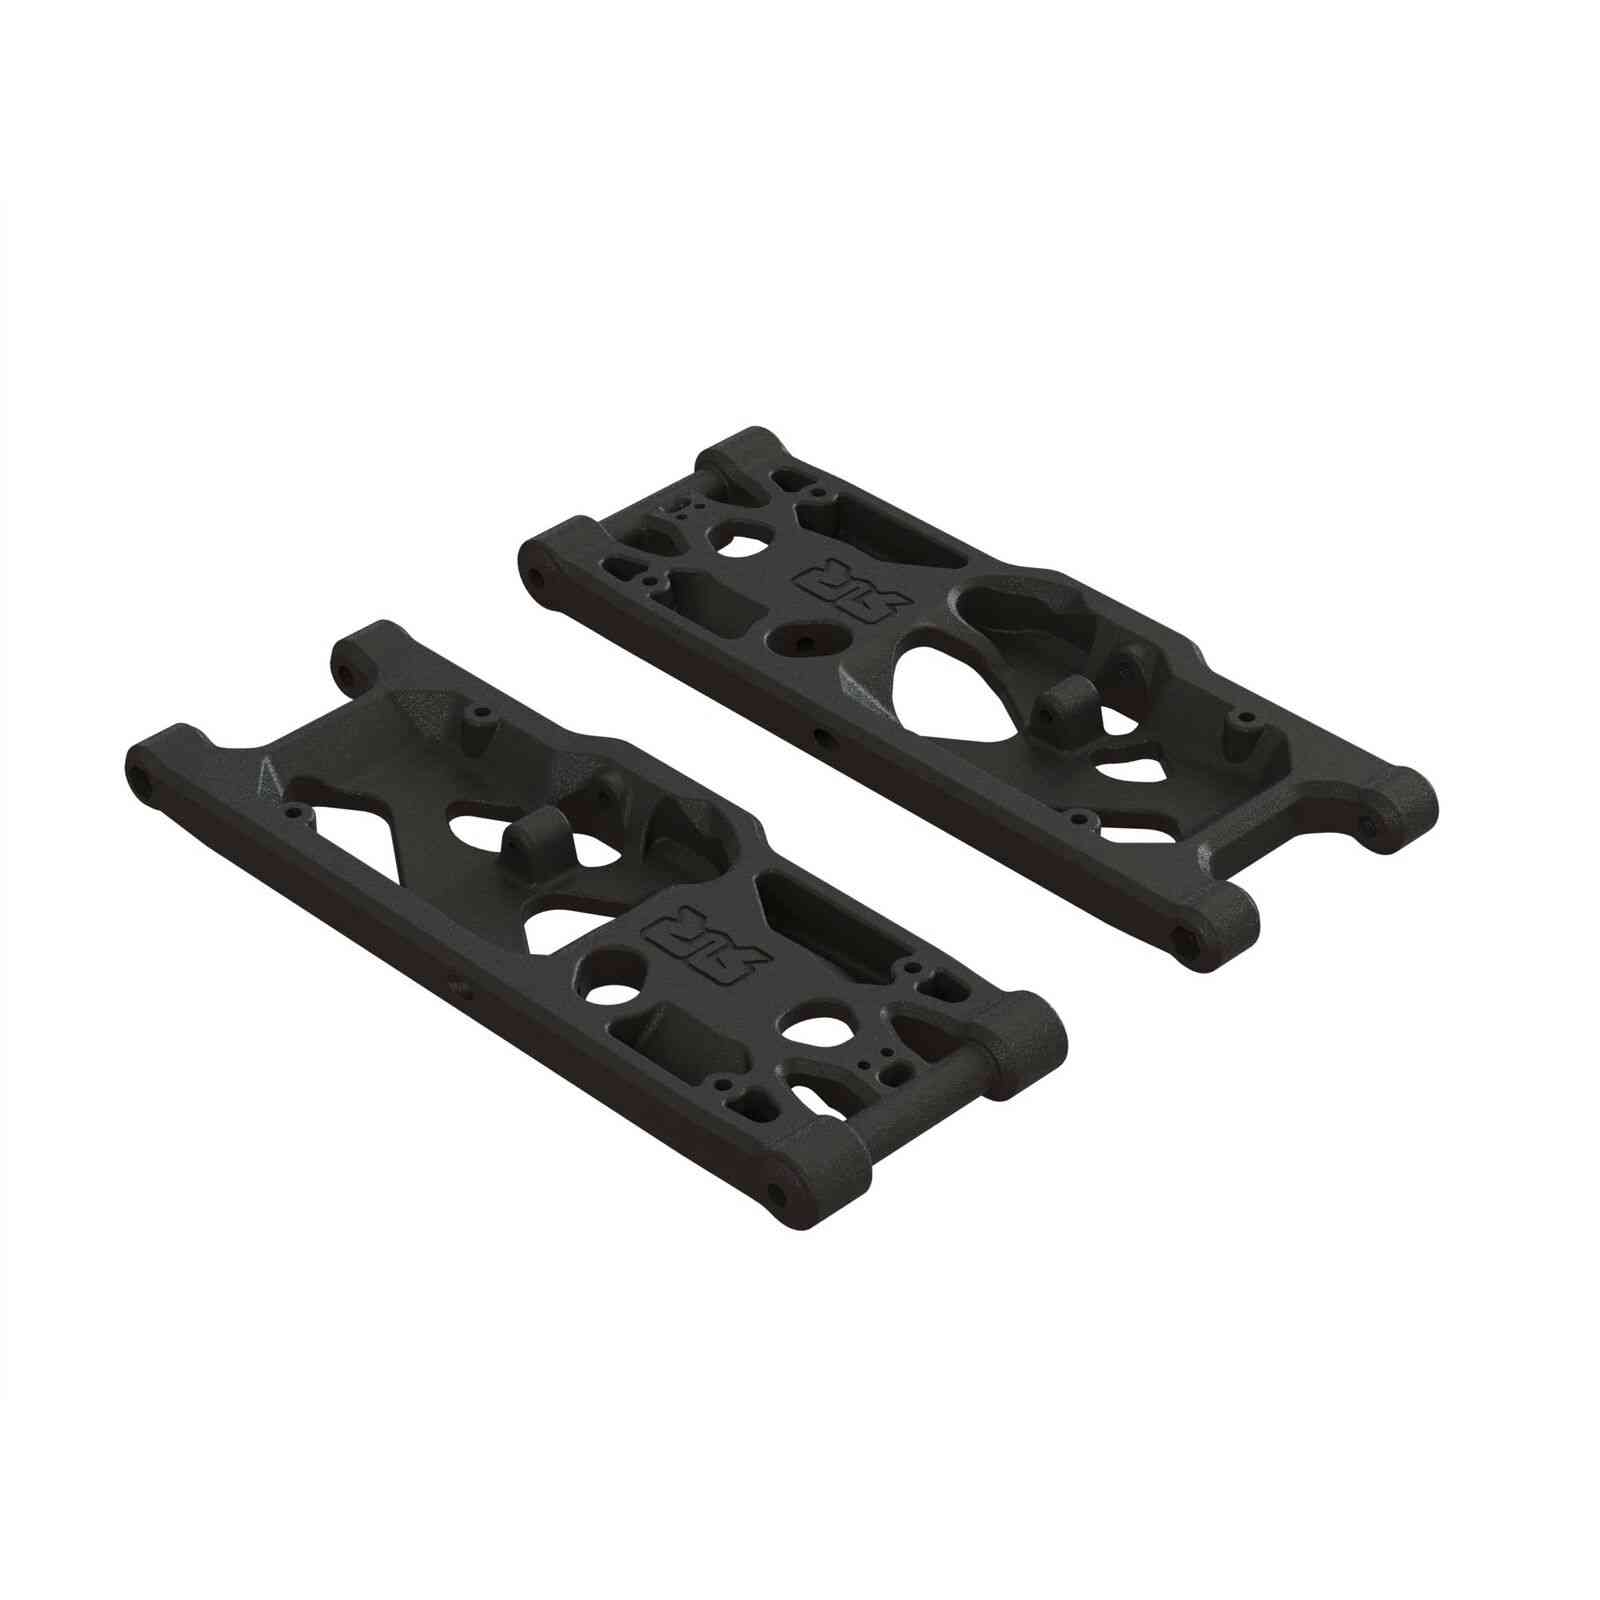 REAR LOWER SUSPENSION ARMS 1 PAIR